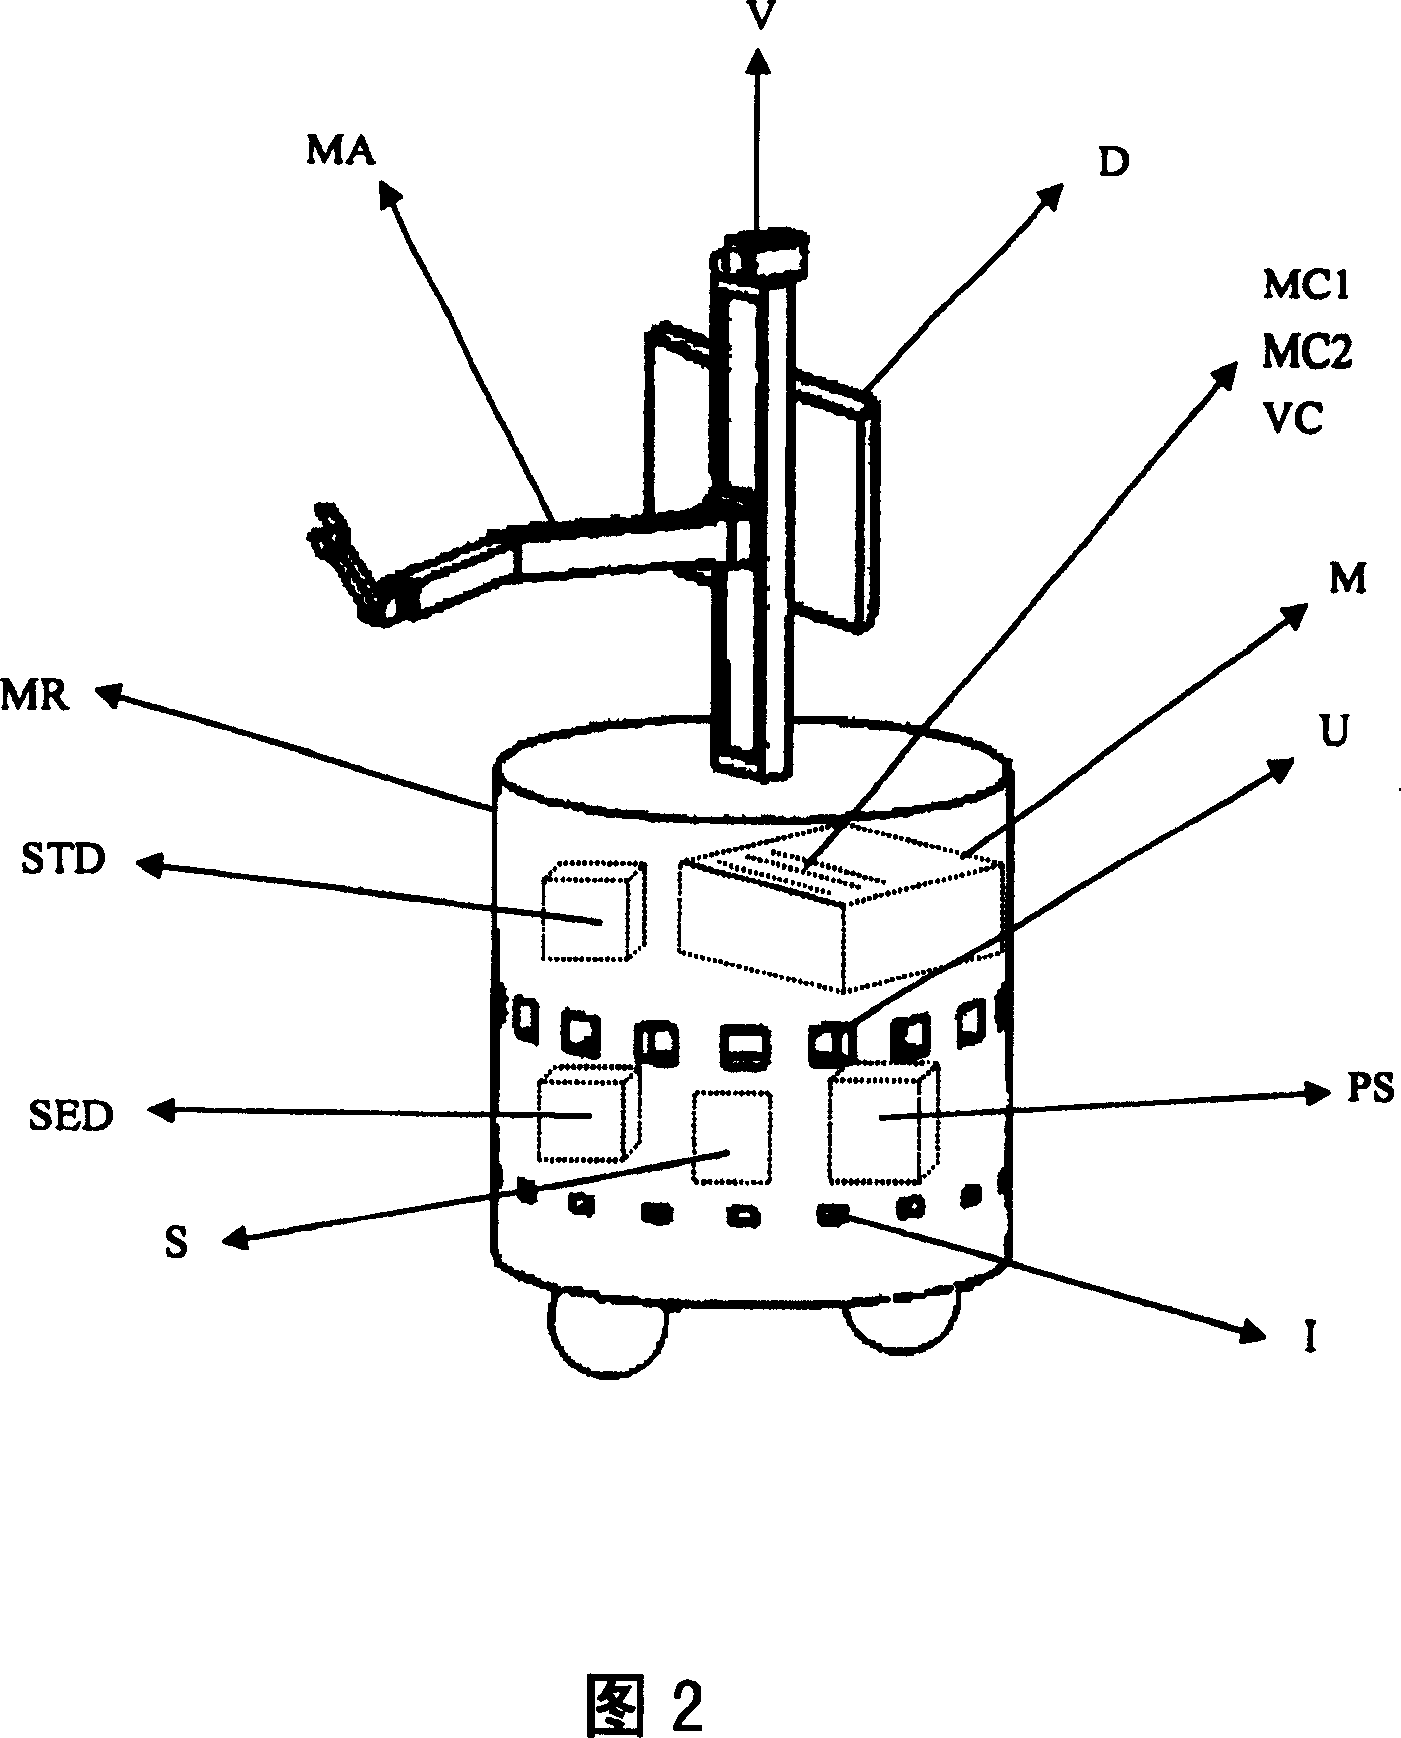 Controlling system of movable manipulator